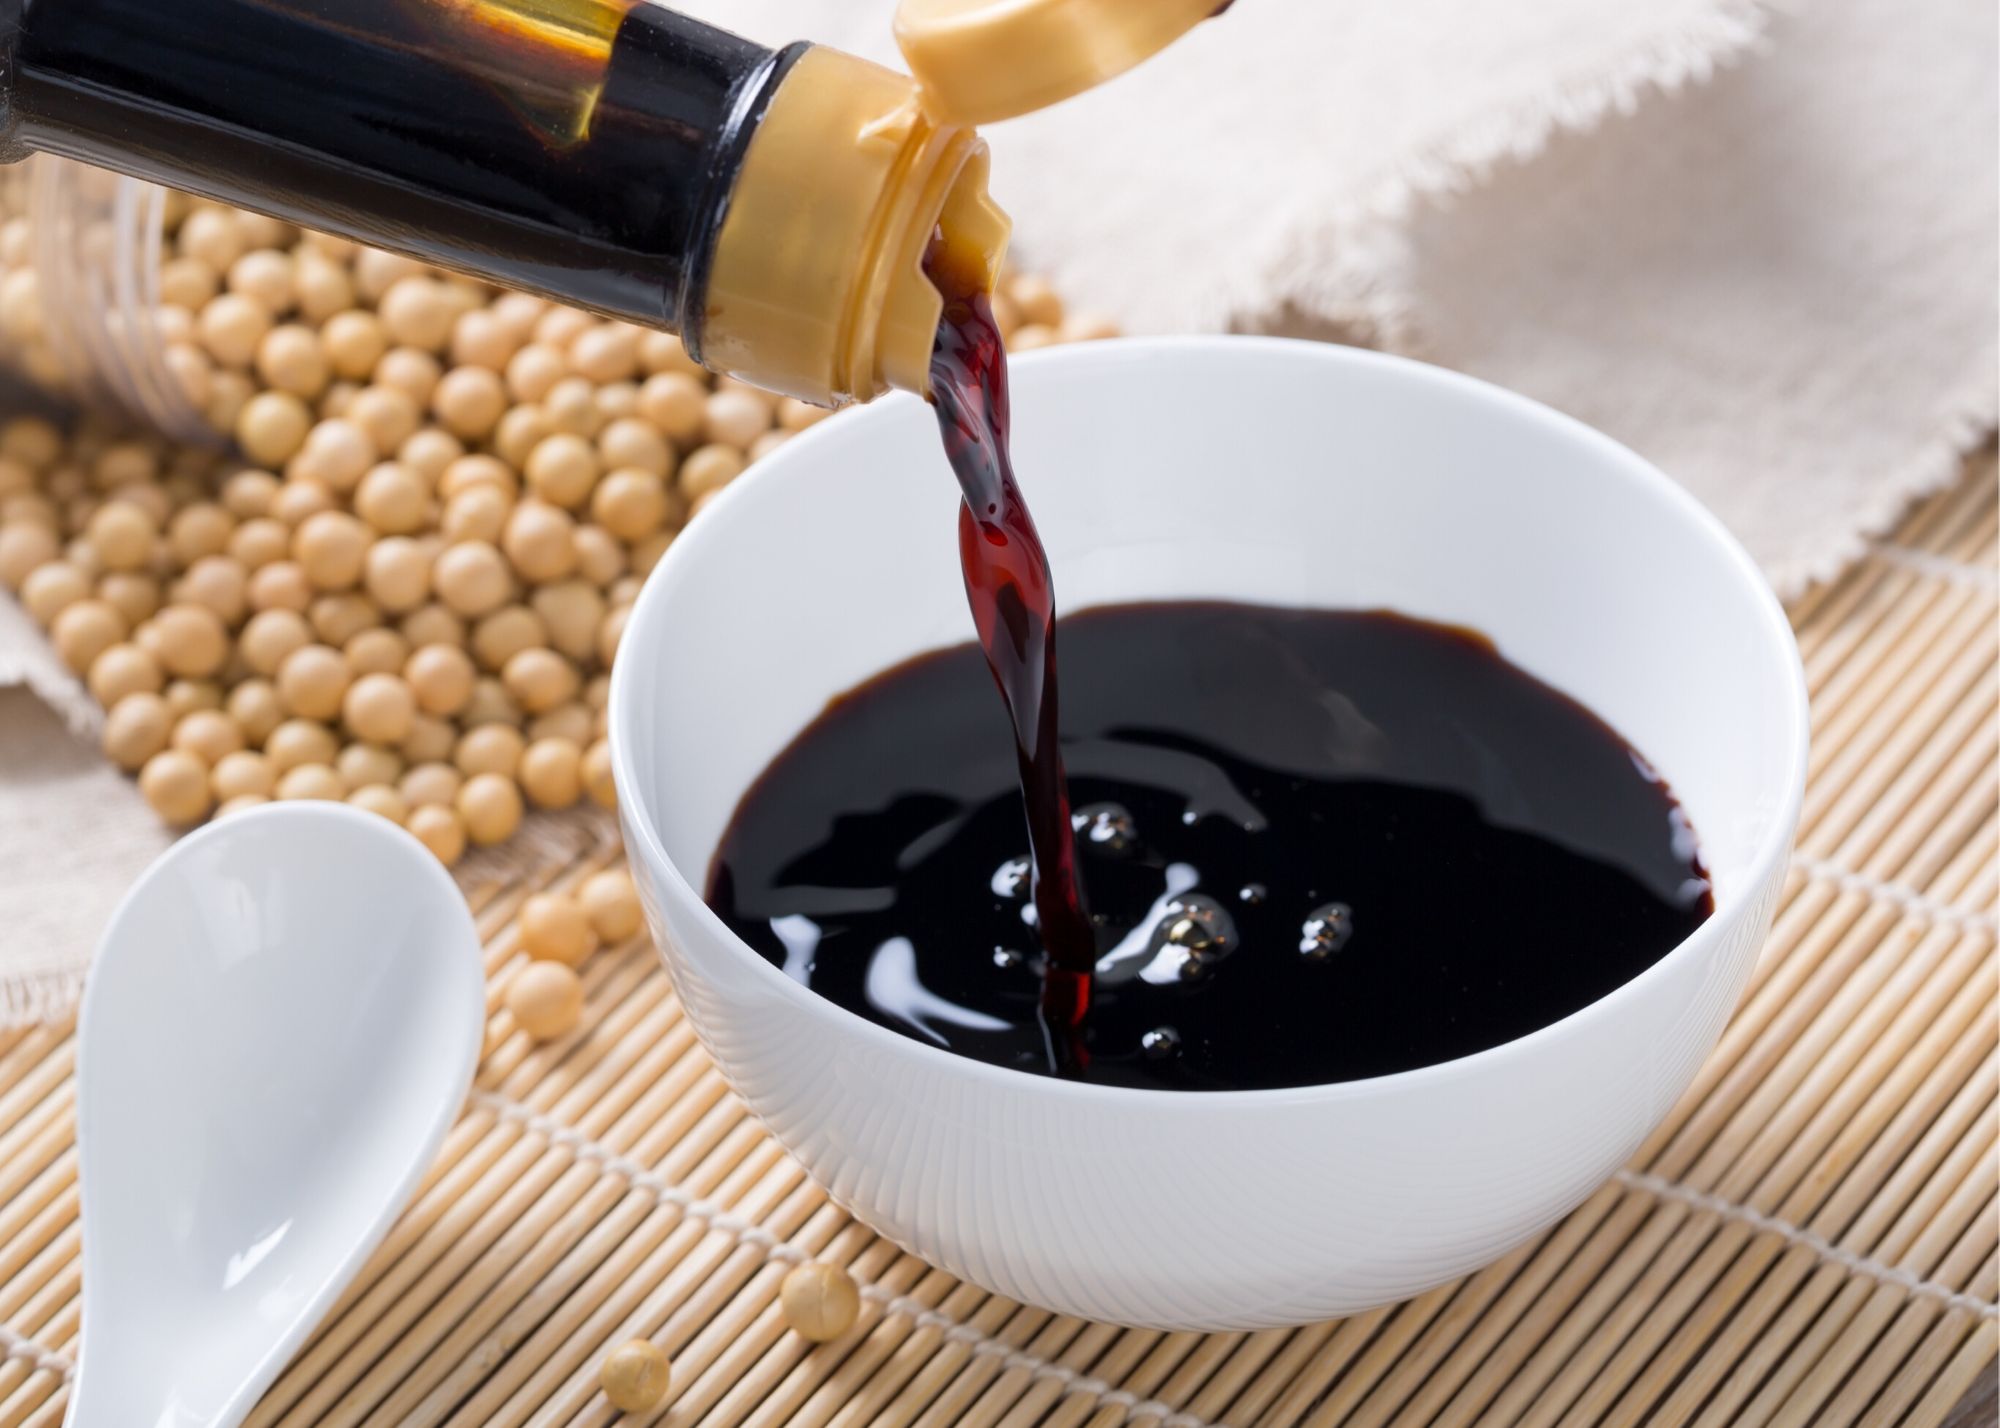 How to store Soy Sauce